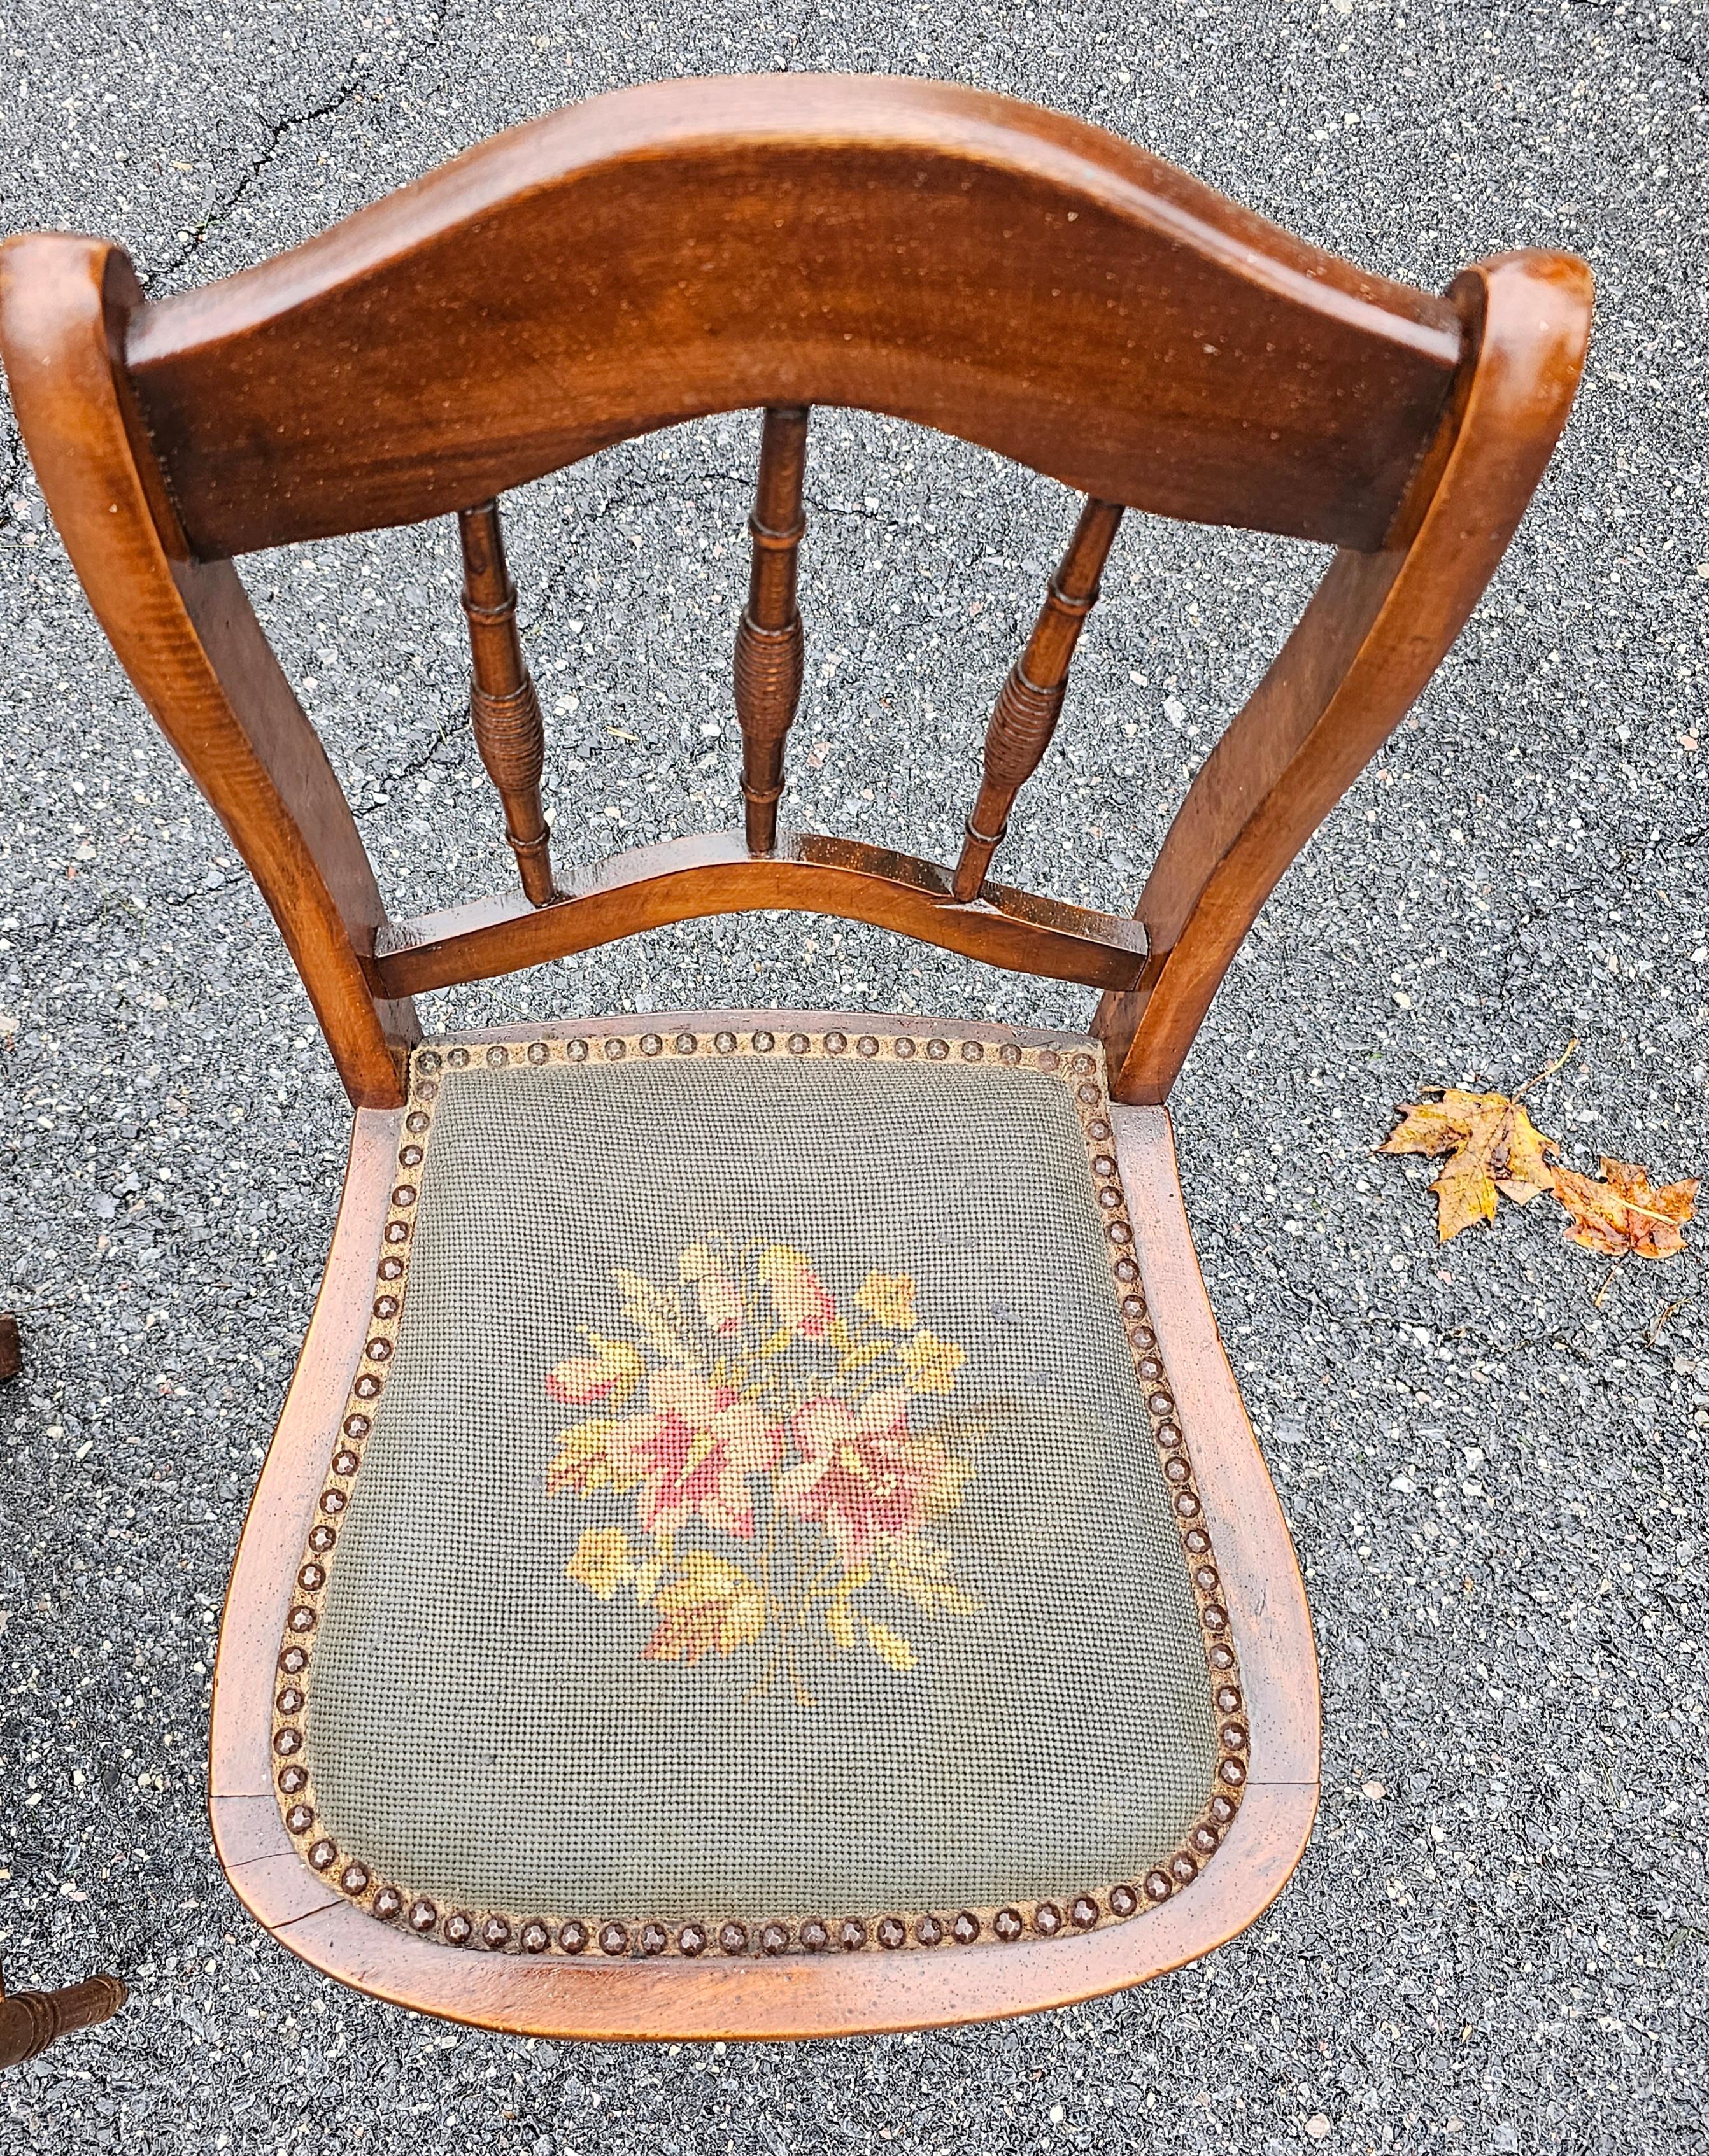 Upholstery 19th Century American Walnut and Needlepoint Upholstered Seat Side Chairs, Pair For Sale